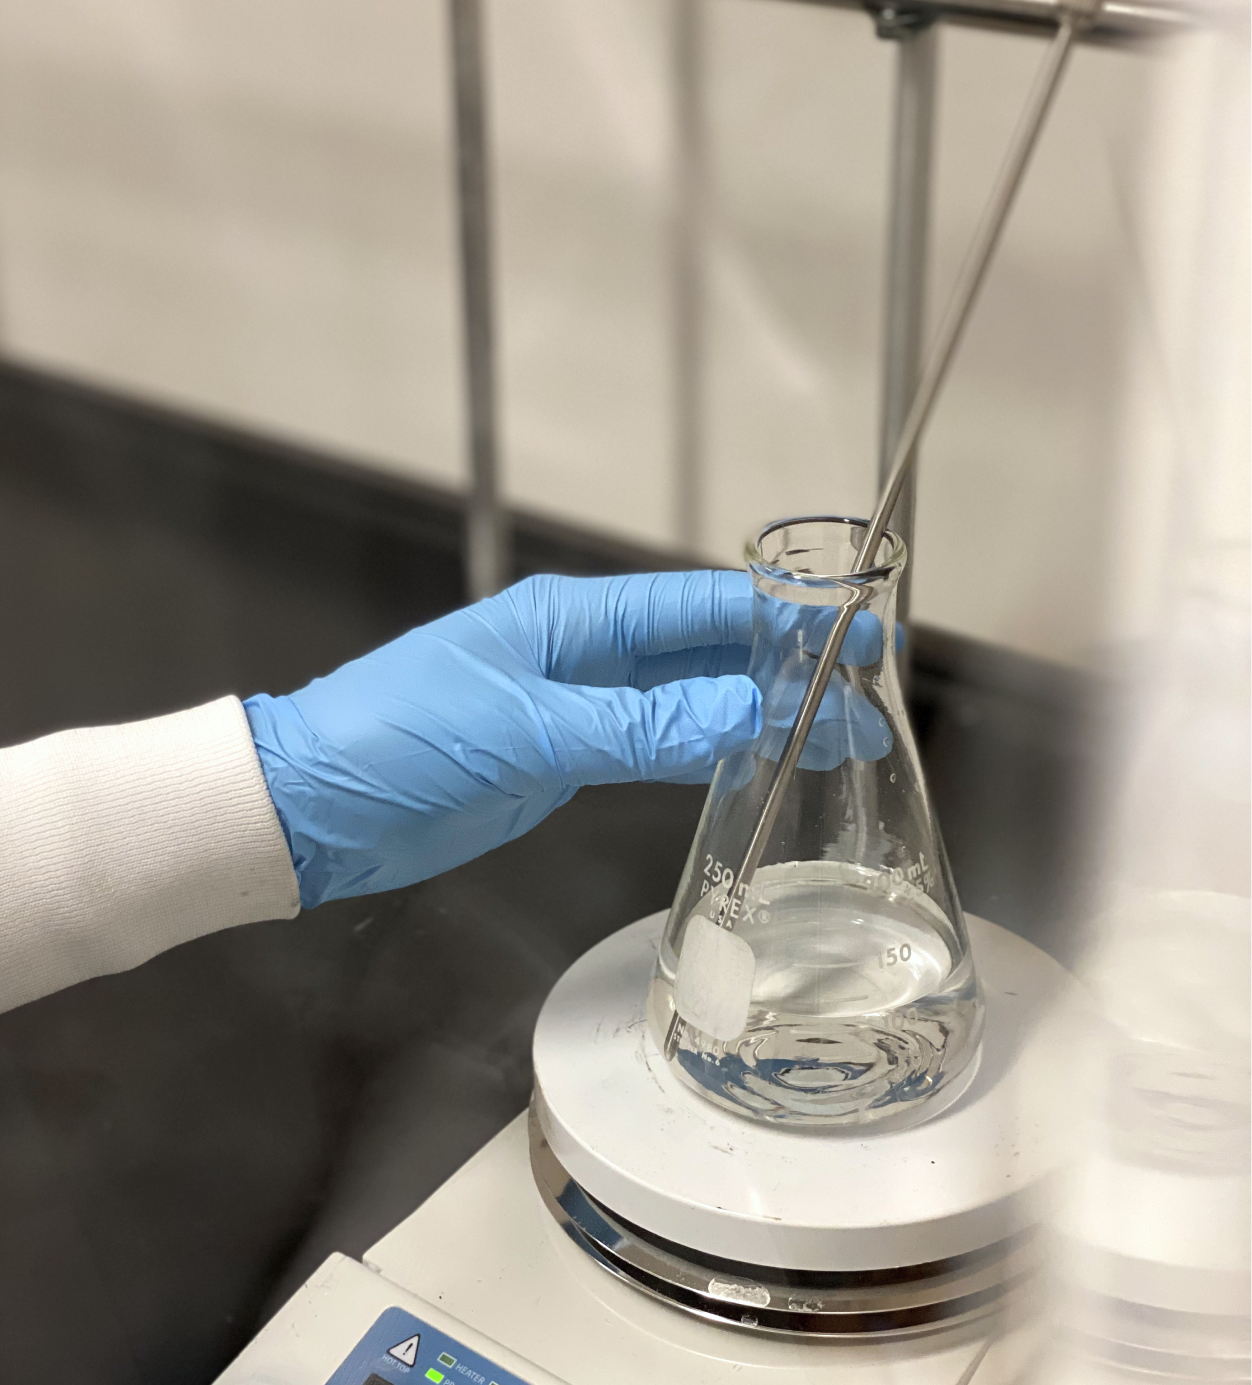 Chemist's hand holding beaker with clear liquid on a digital scale